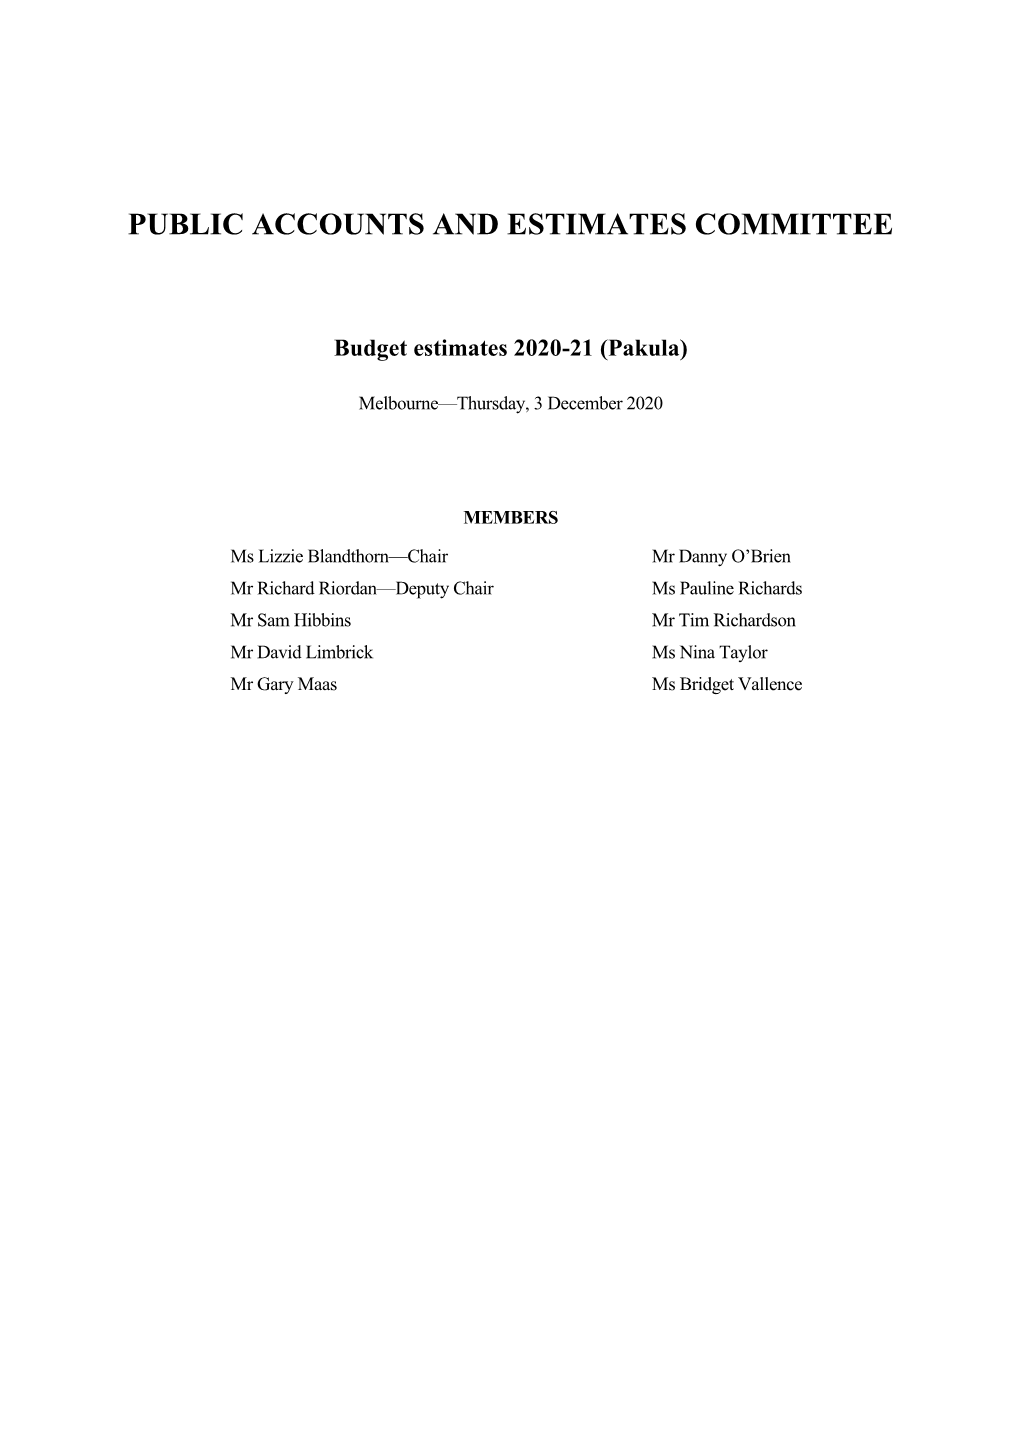 Public Accounts and Estimates Committee